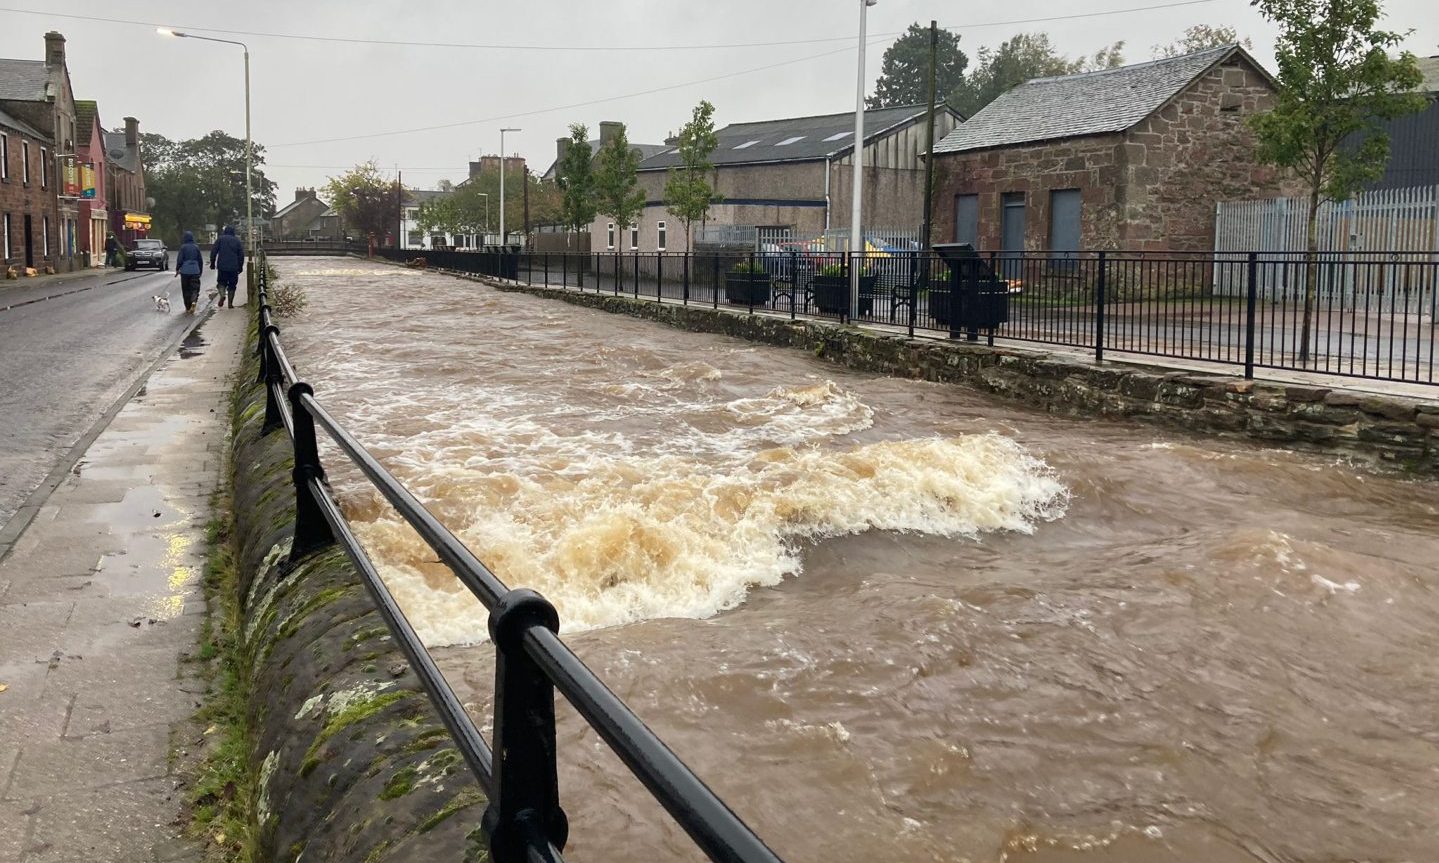 Recently-installed flood defences protected residents from the flooded Alyth Burn. Image:  Supplied by Alyth Resiliance team.